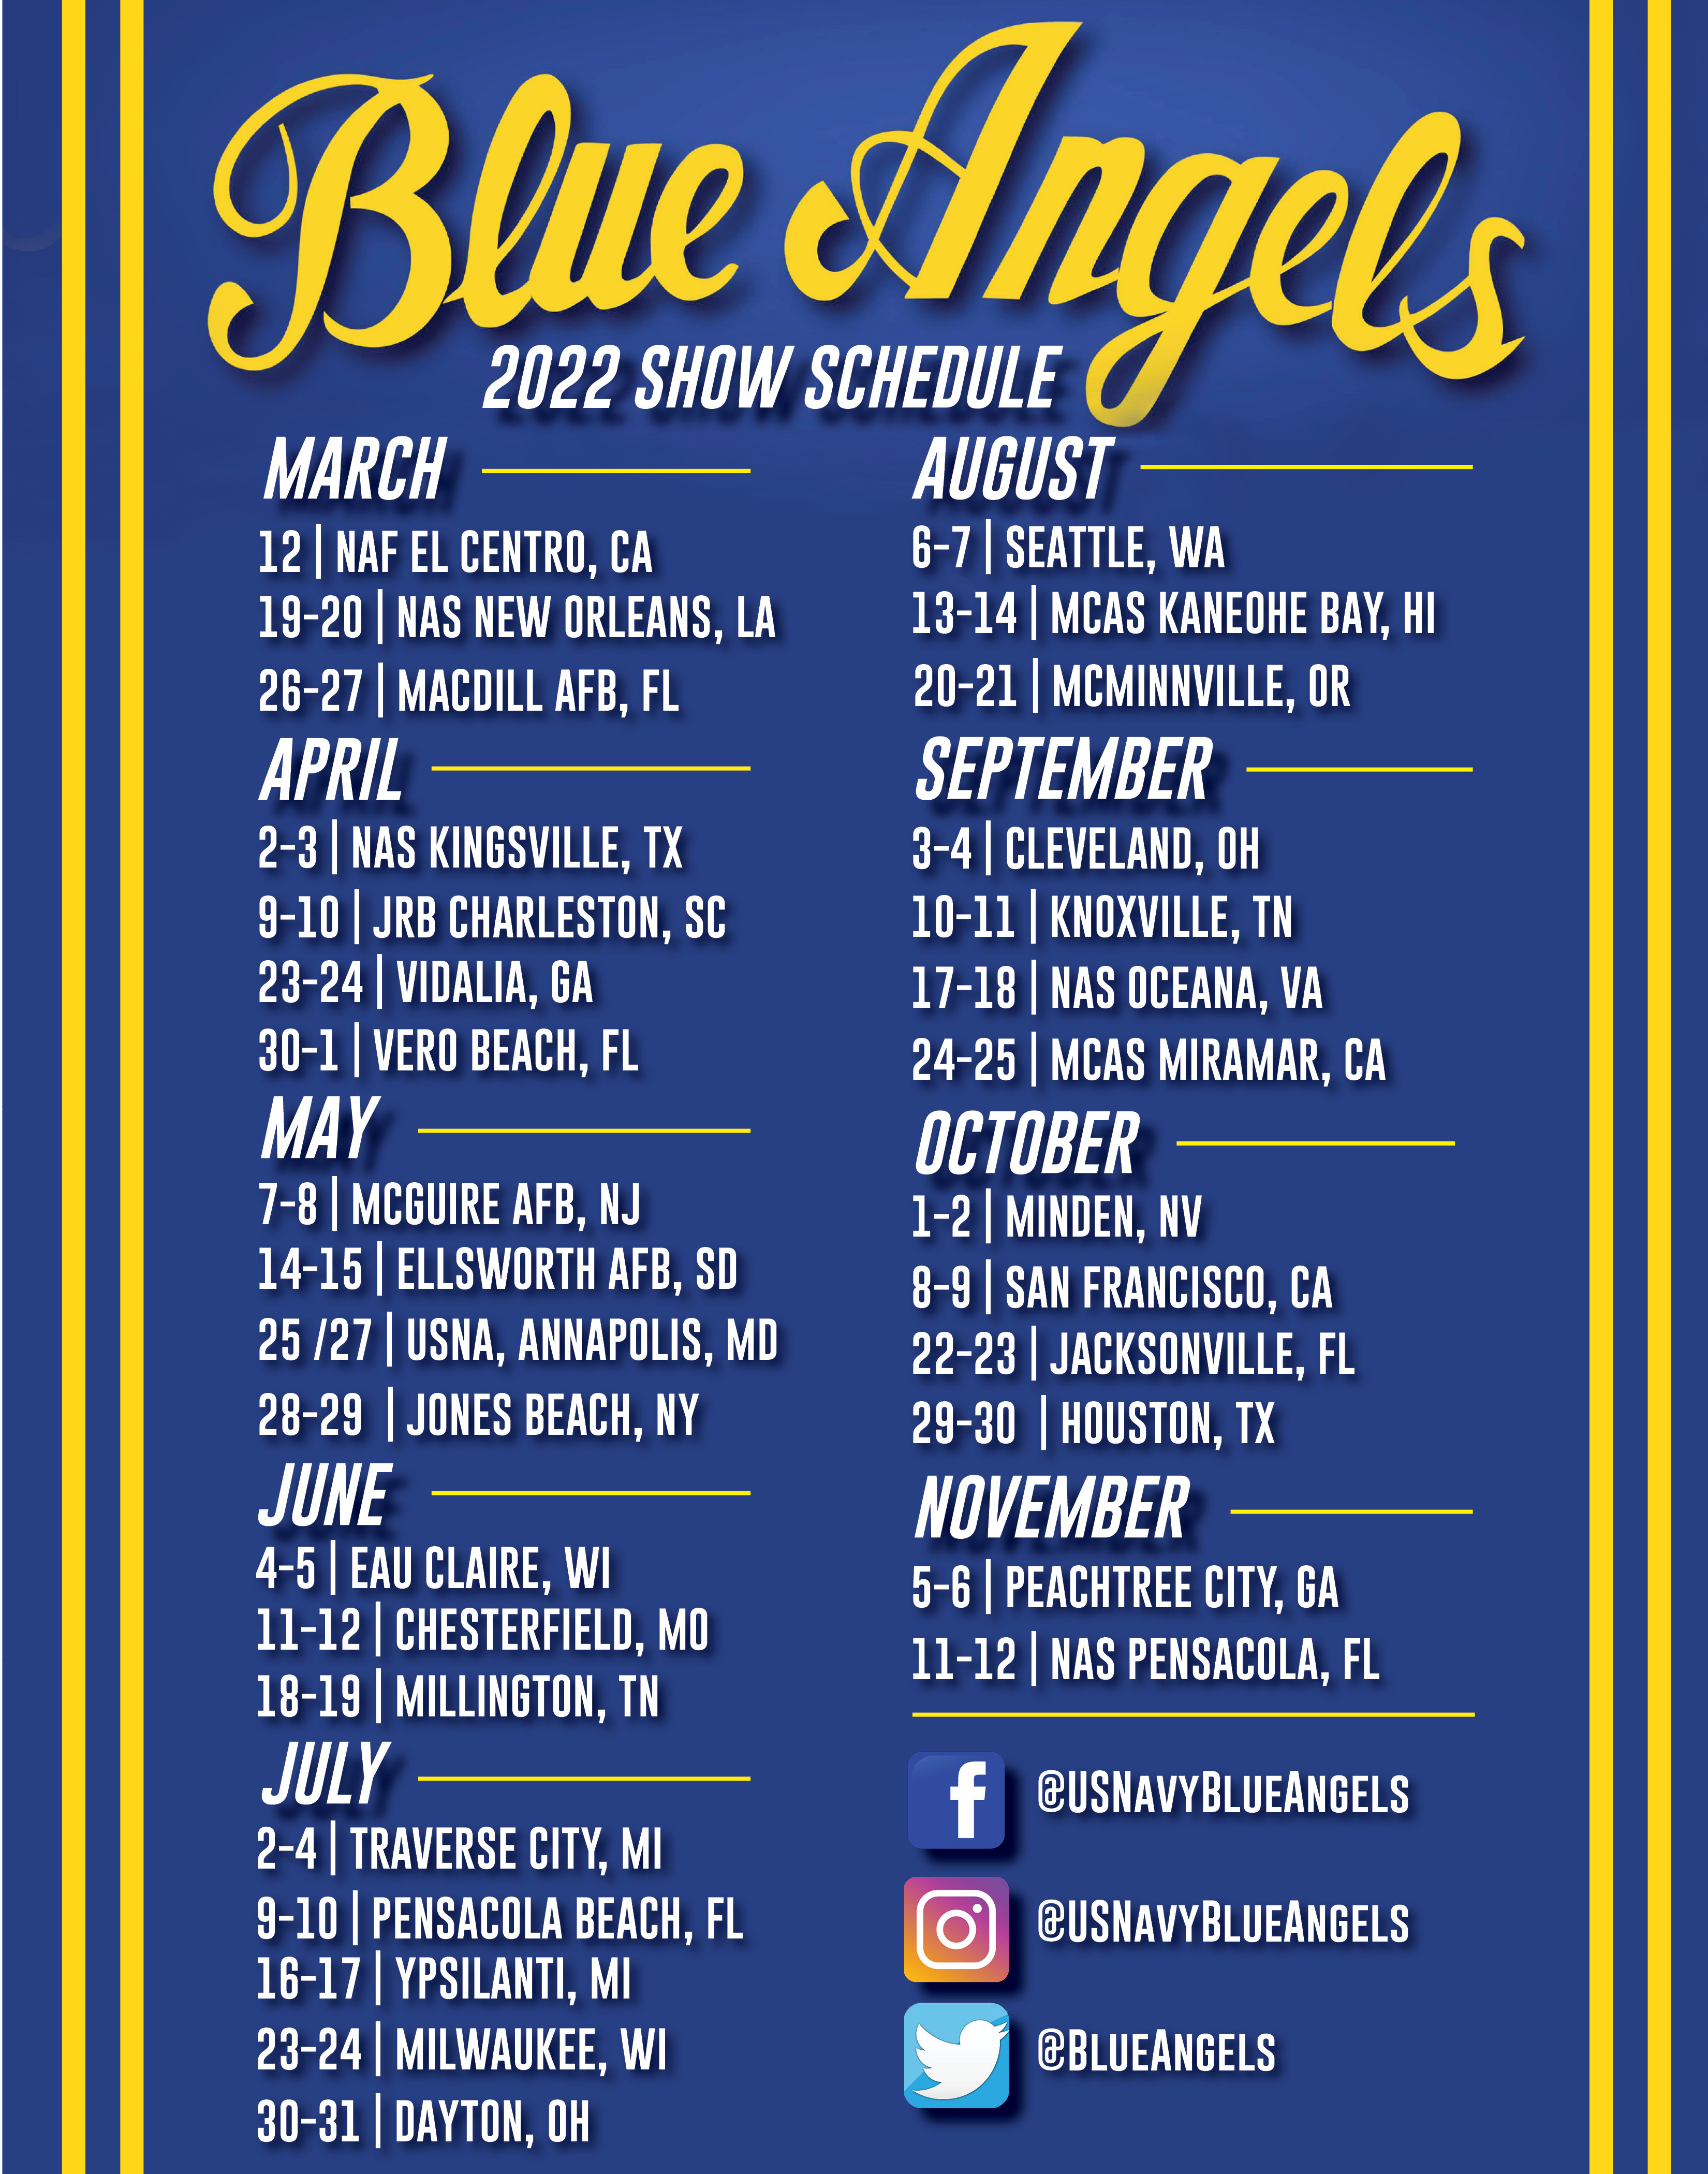 US Navy Blue Angels 2022 Schedule Dates & Locations Announced! News